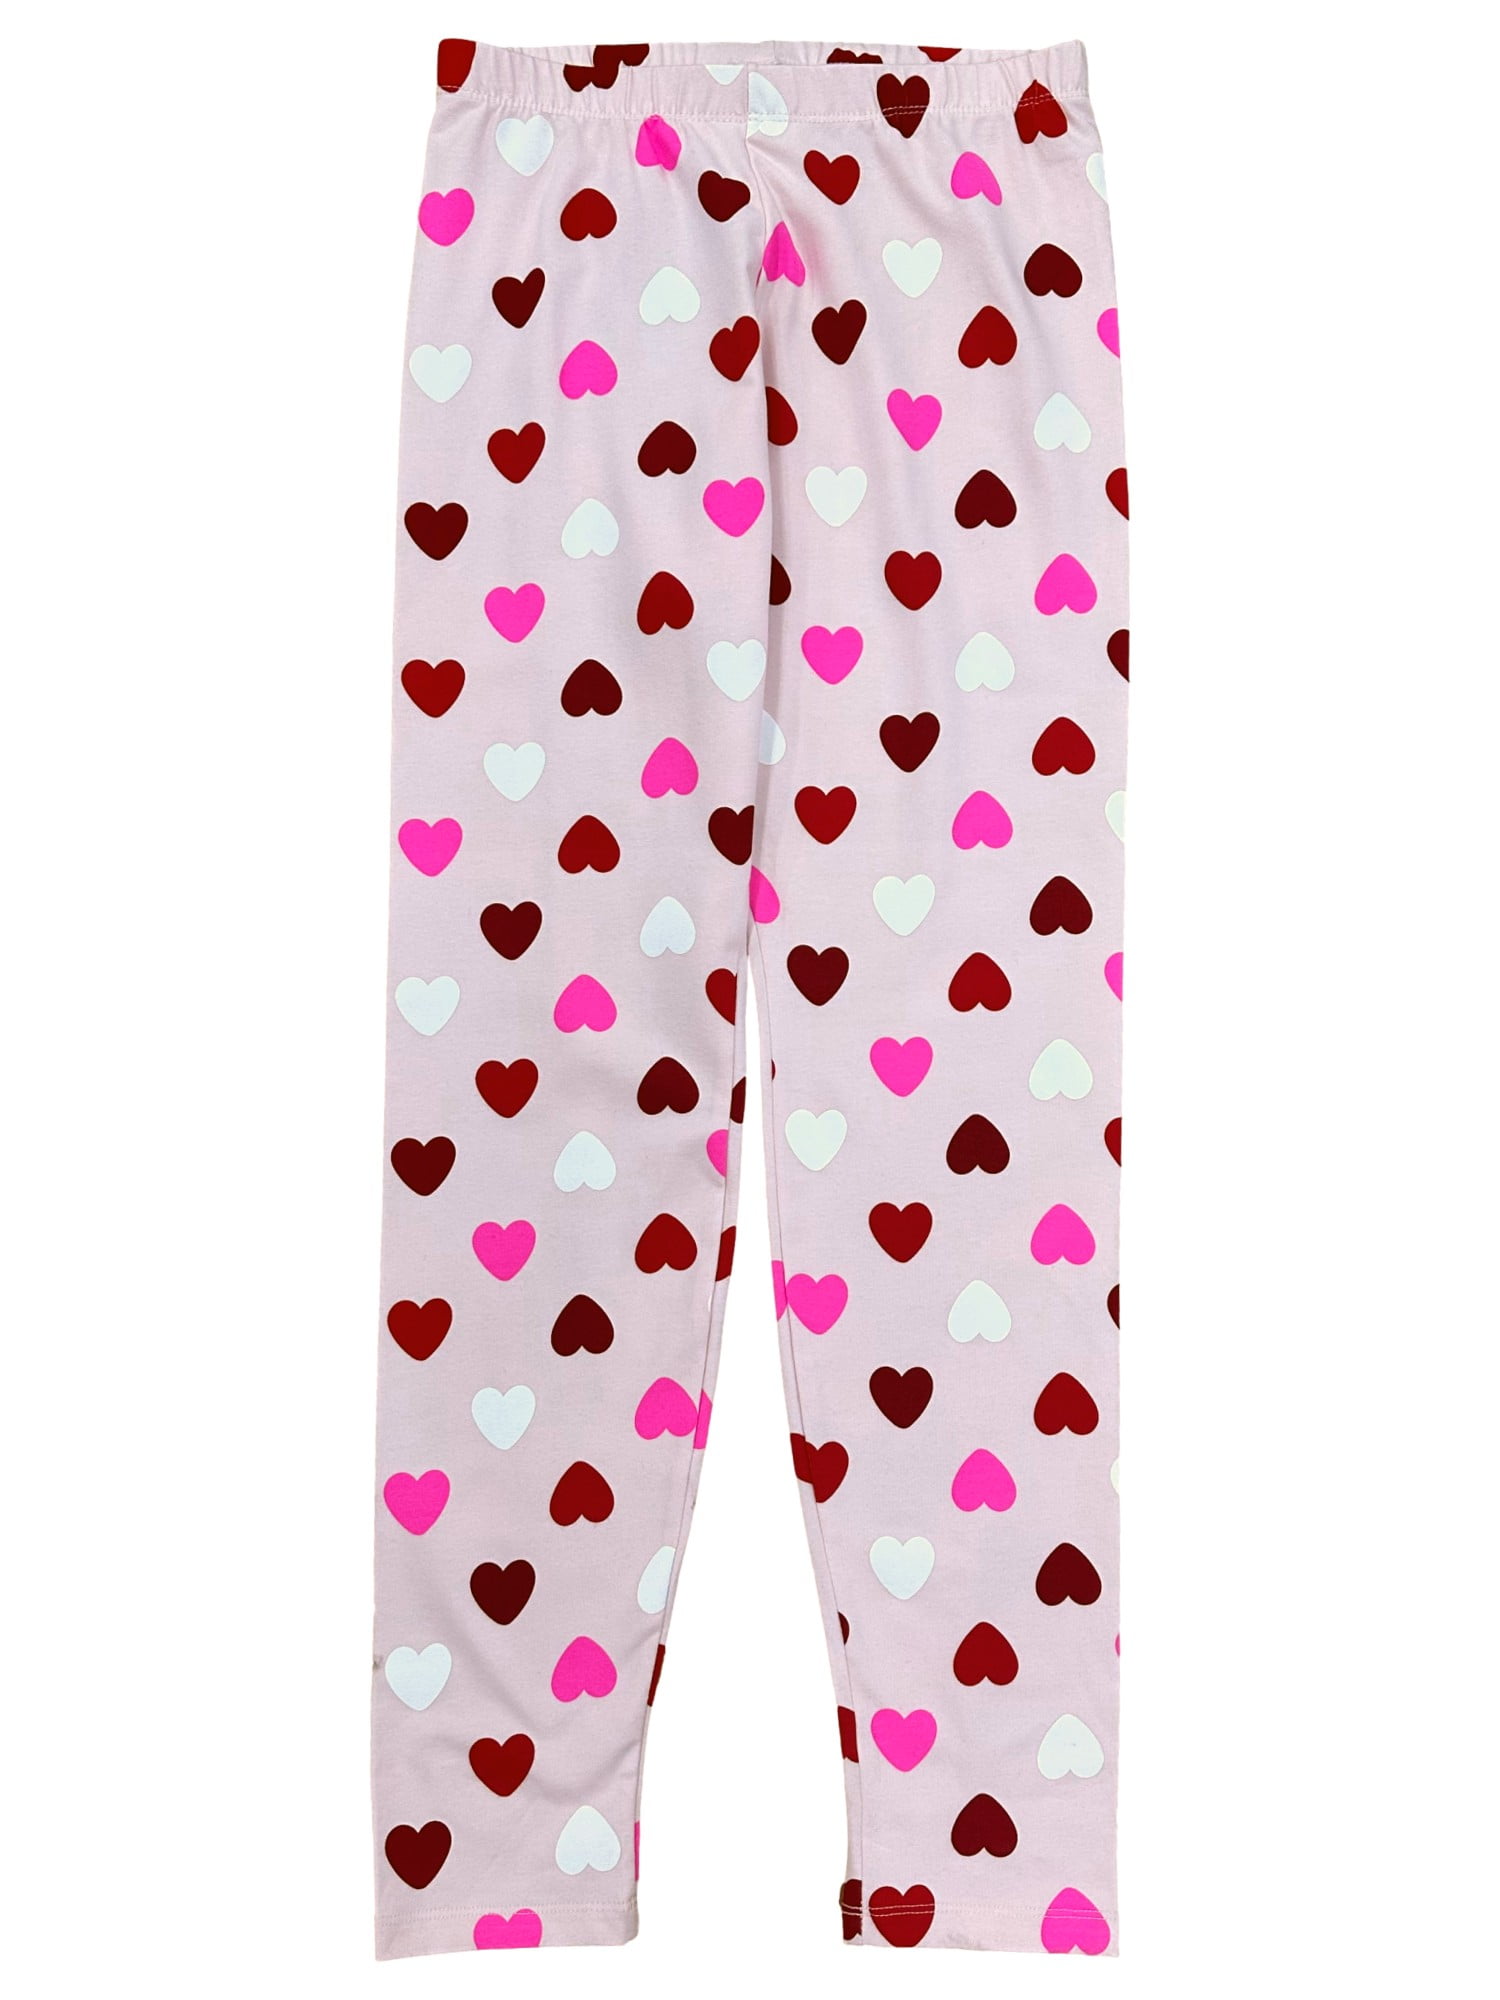 Girls Pink Red & White Hearts Valentines Day Leggings Pants X-Large (14/16)